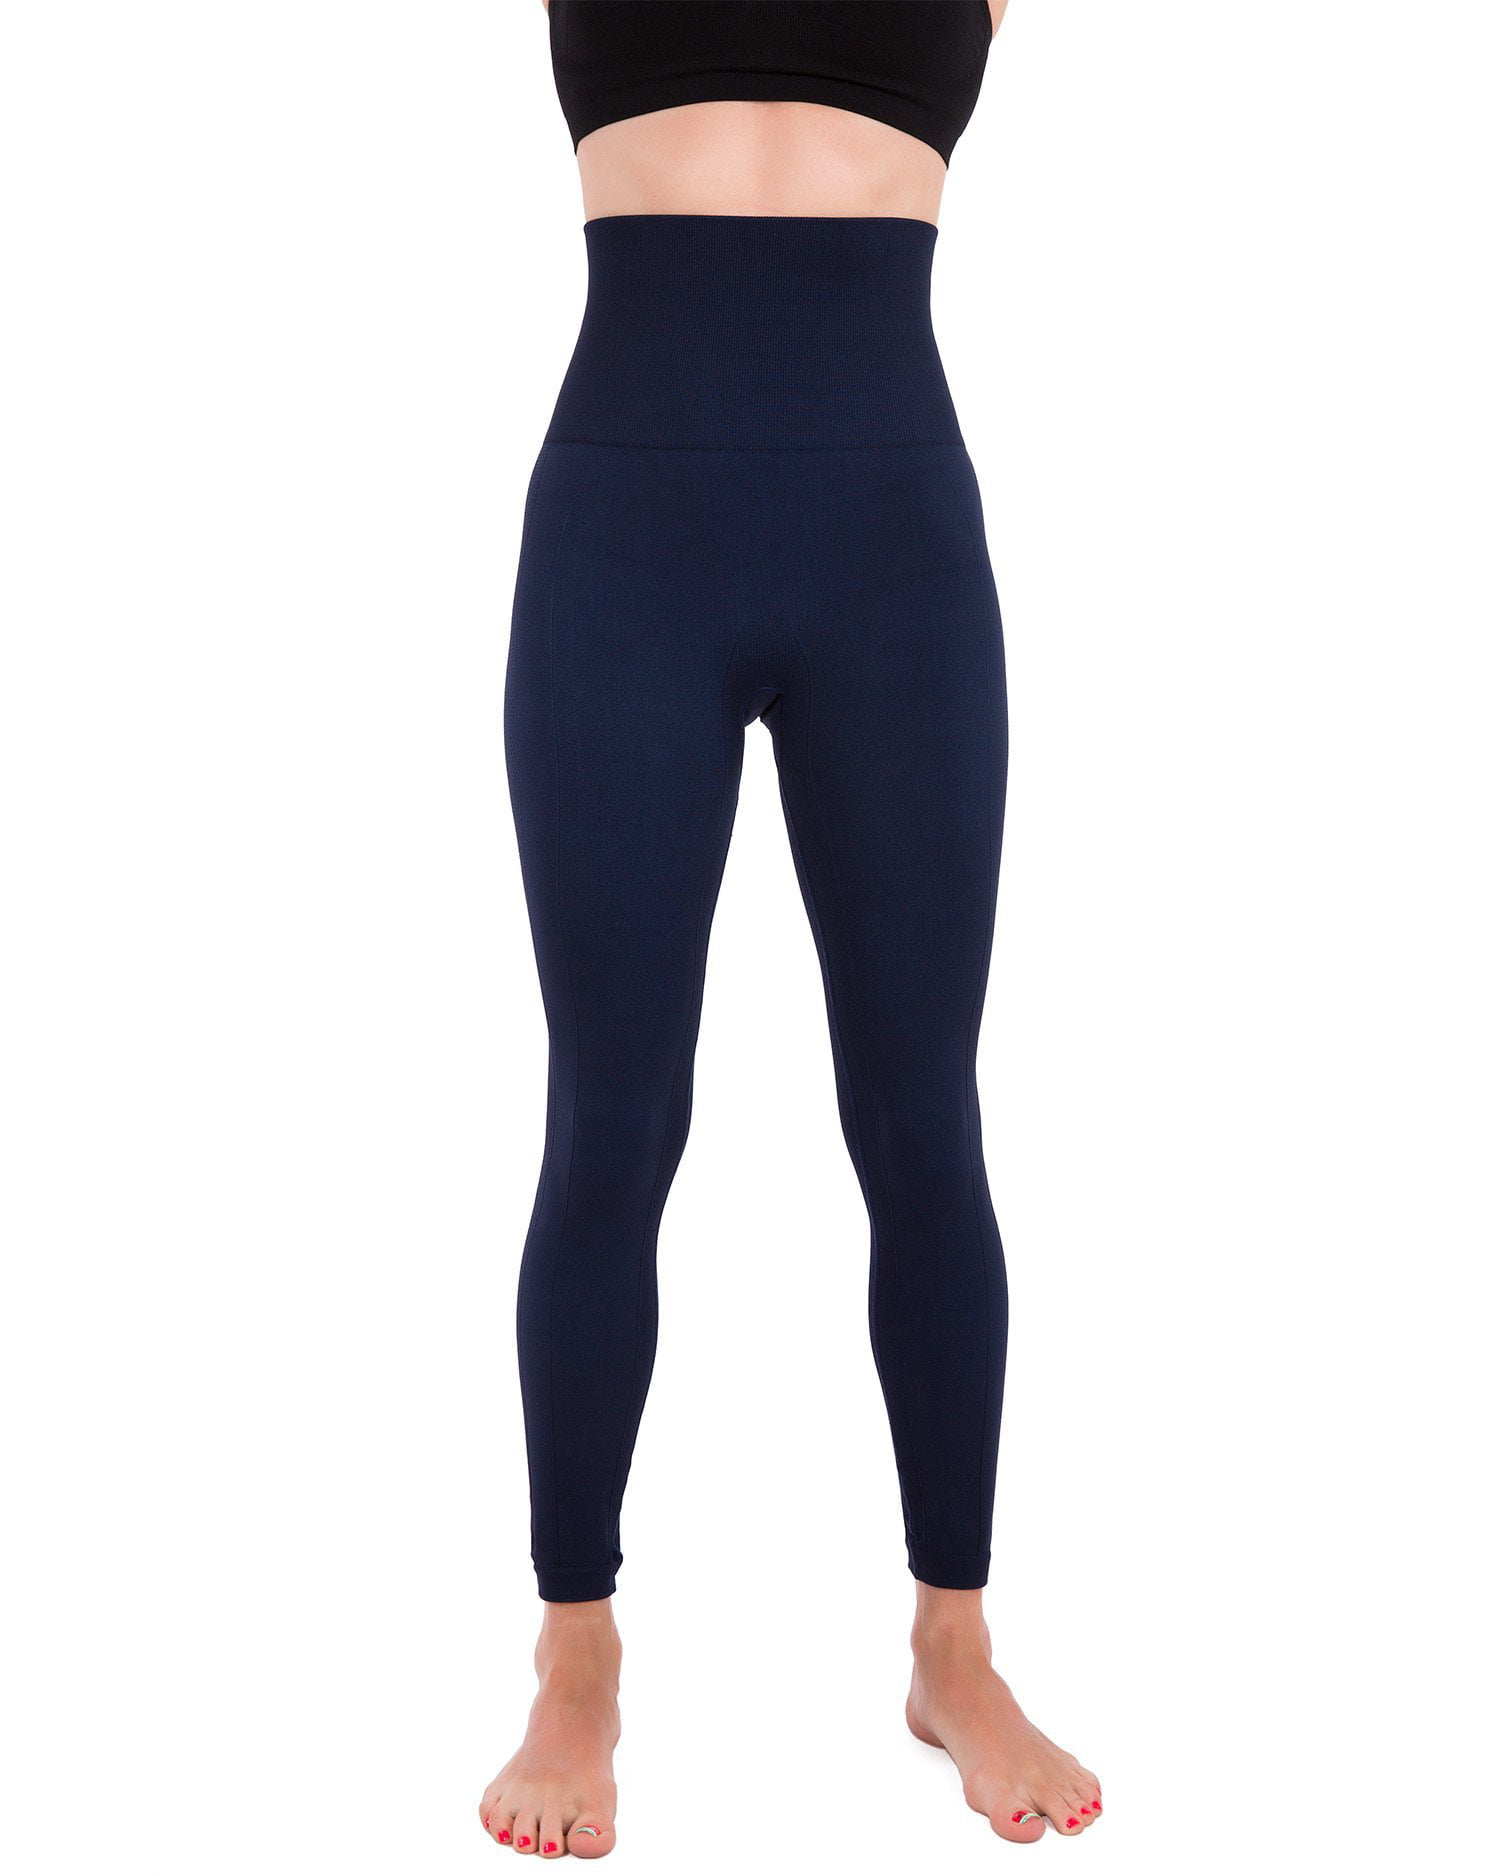 These Are the 15 Best Quality Leggings and Yoga Pants on Amazon | Us Weekly